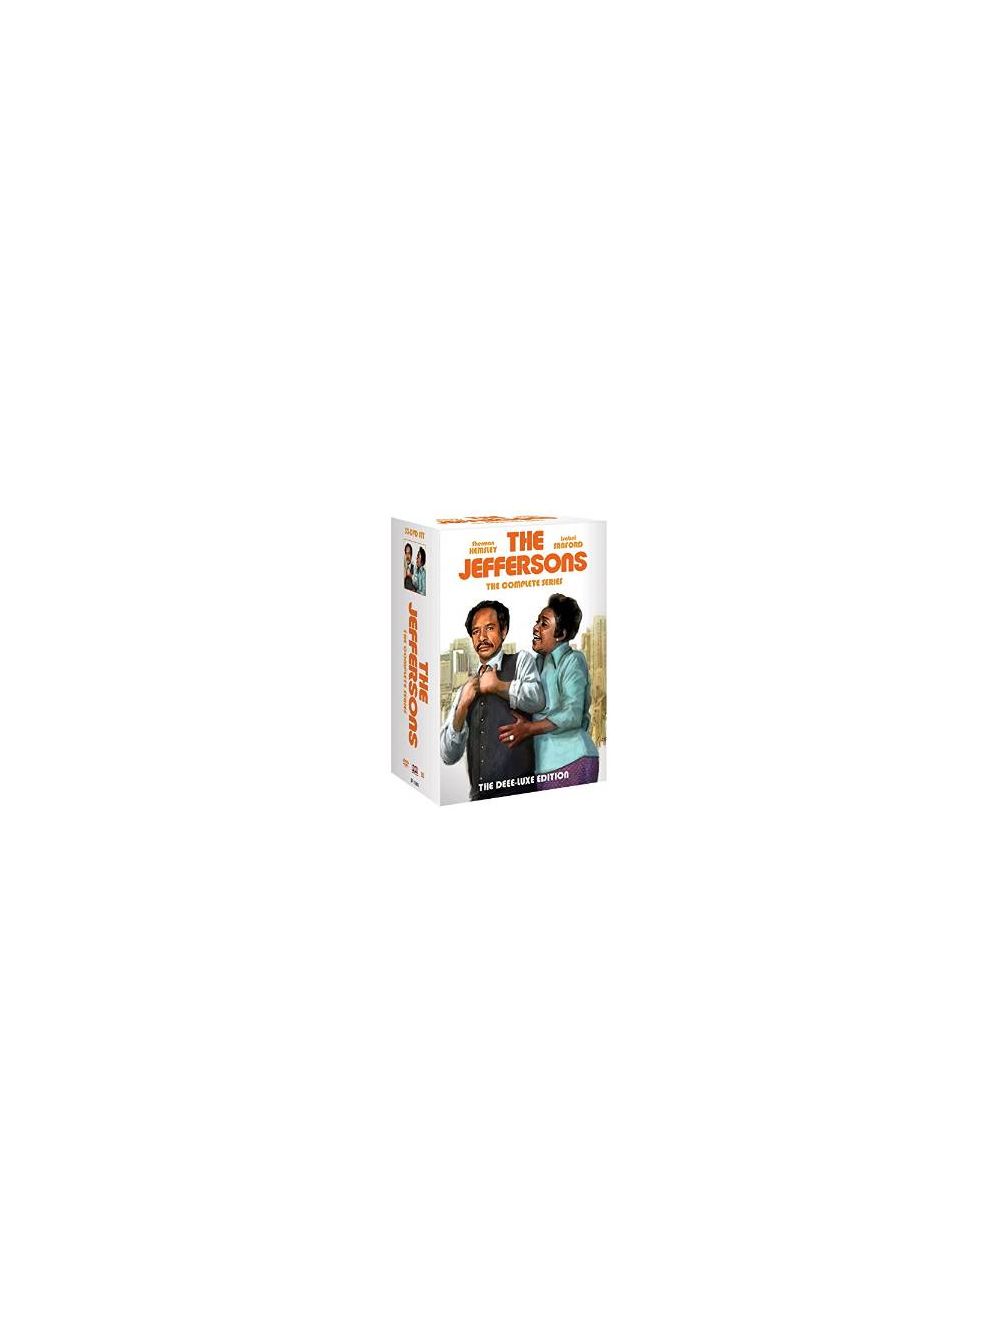 diego carrera recommends the jeffersons complete series pic